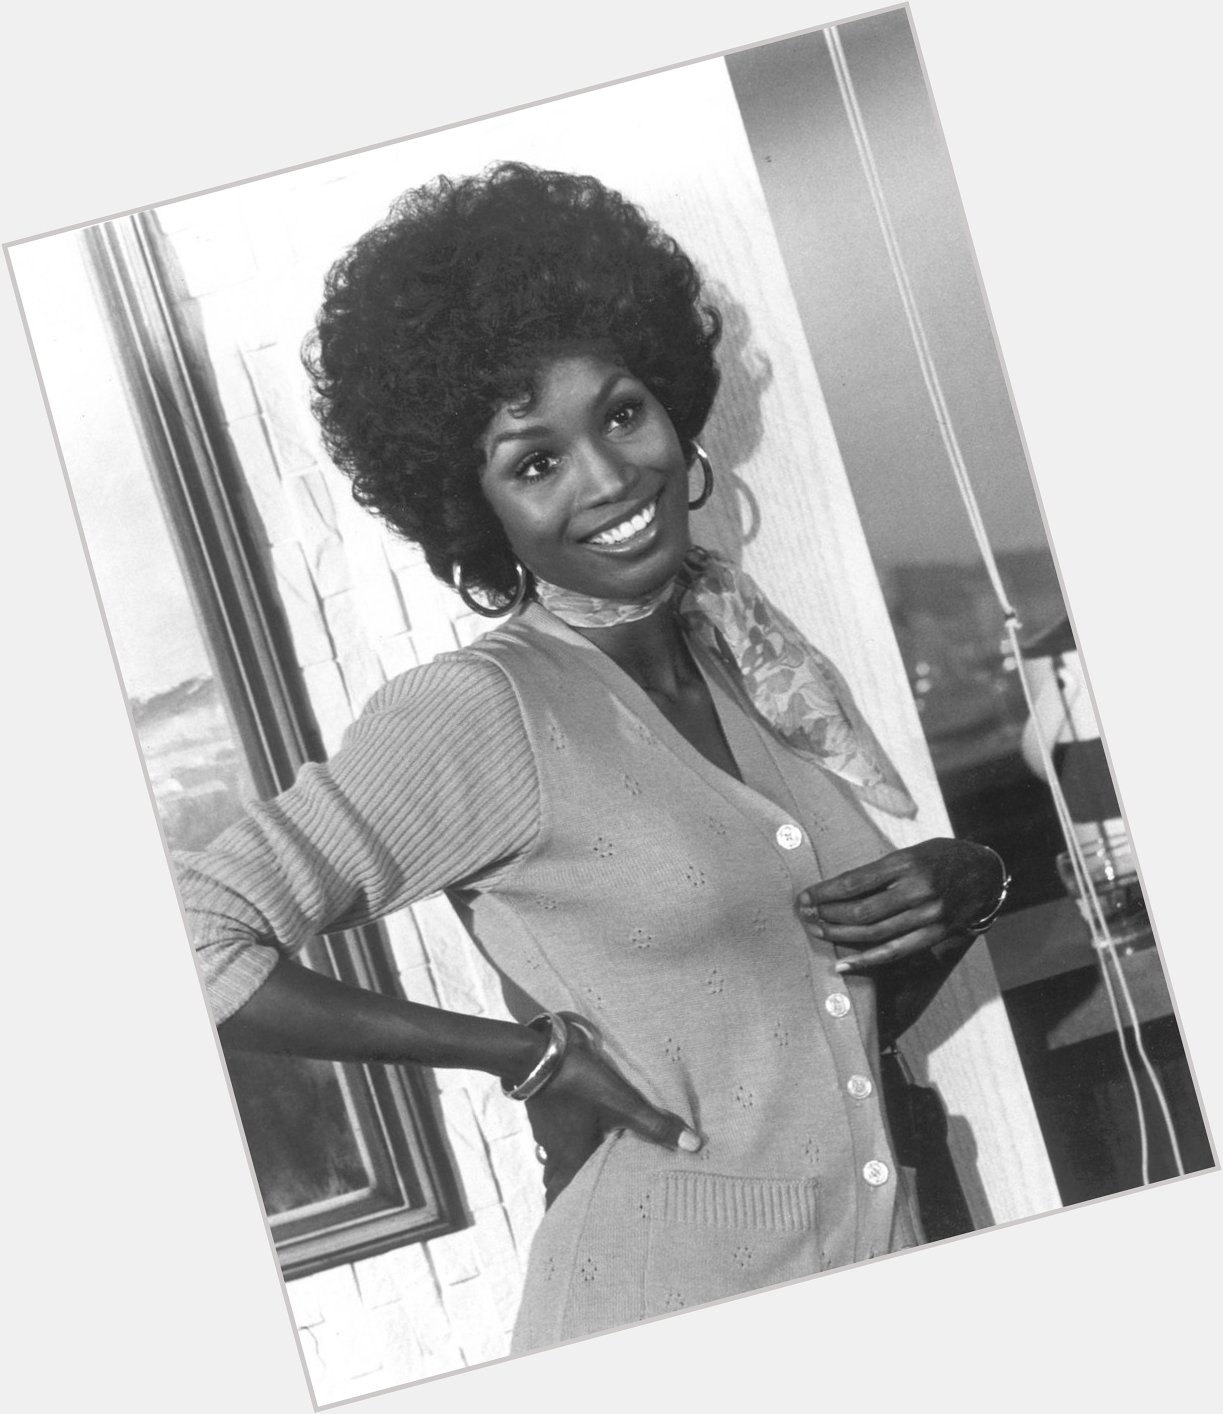 Happy birthday to Teresa Graves, (born on this date in 1948), star of GET CHRISTIE LOVE! 